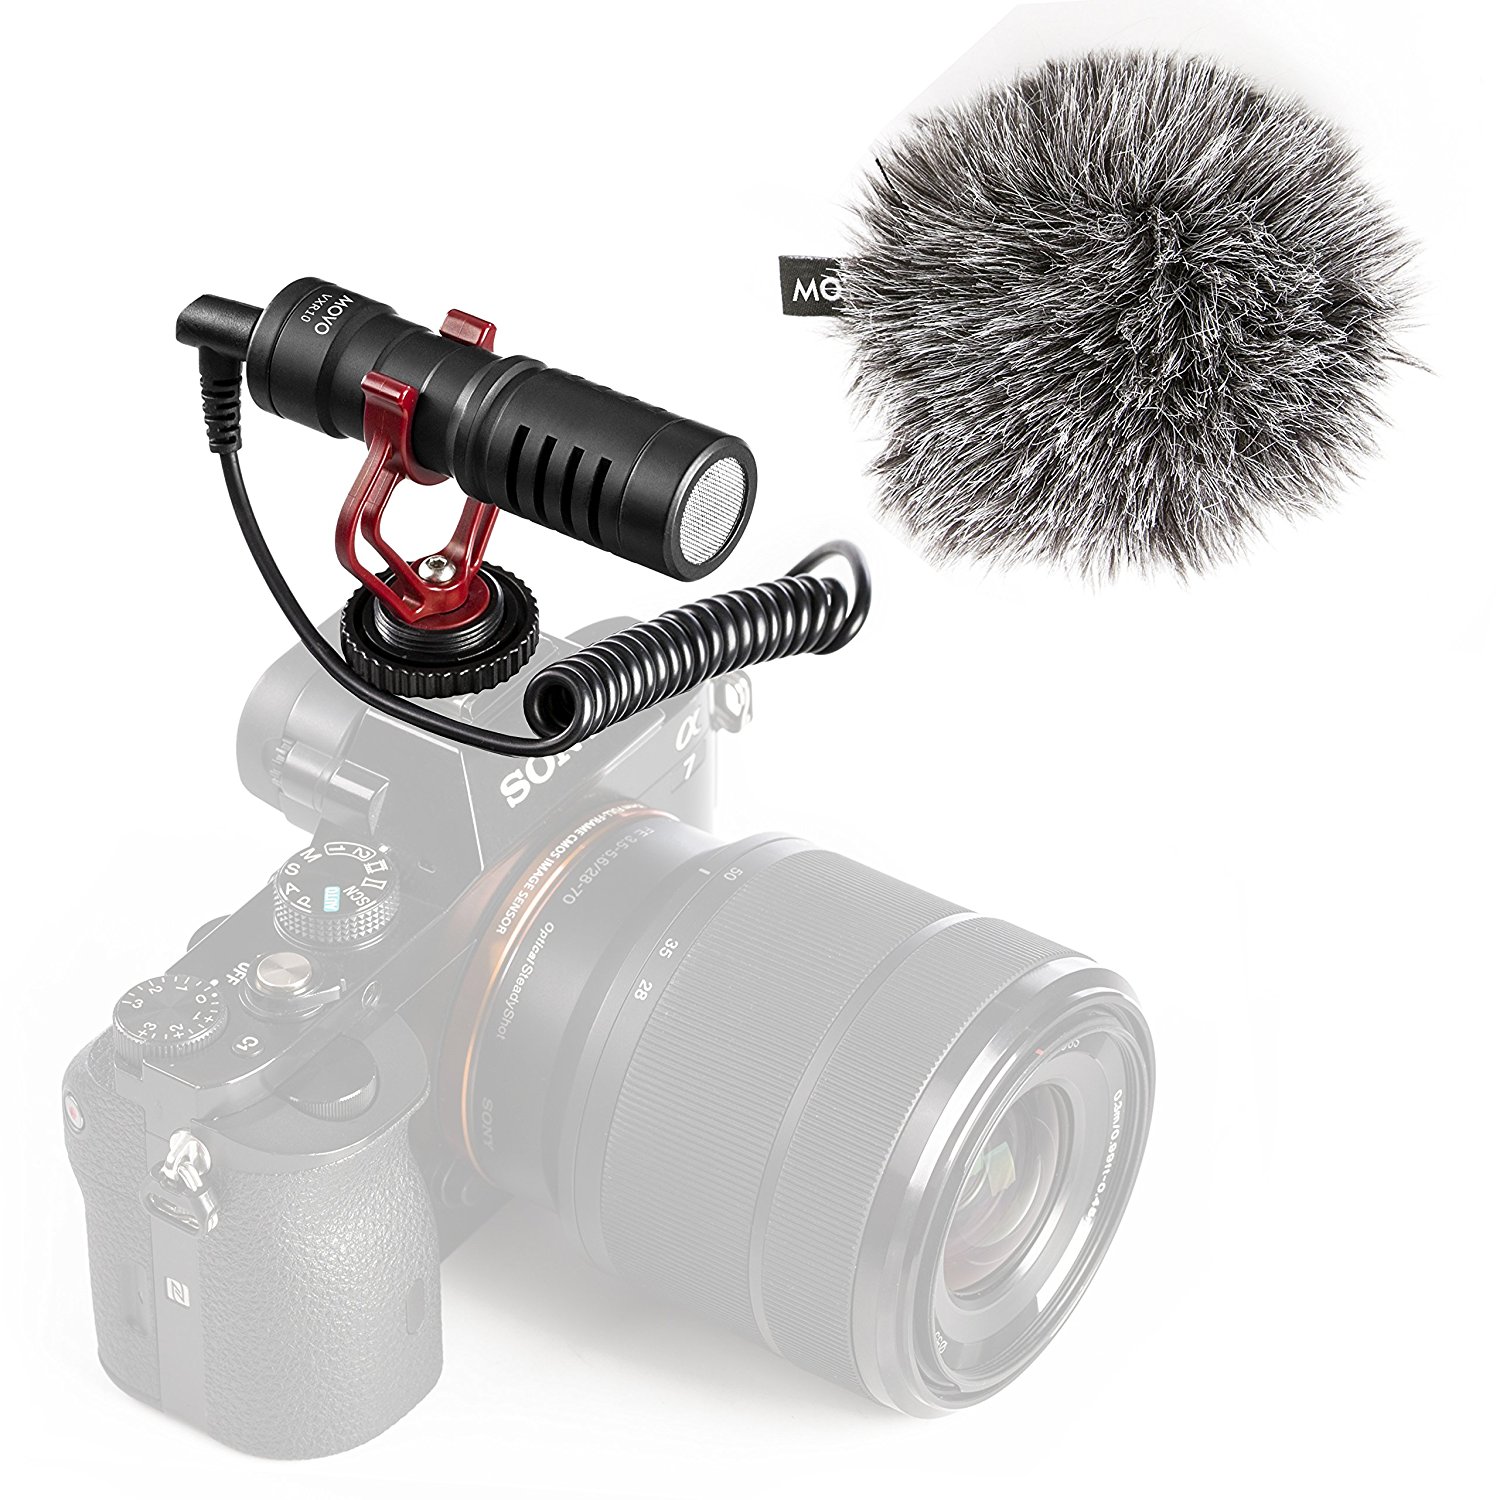 Movo Vxr10 Universal Cardioid Condenser Video Microphone With